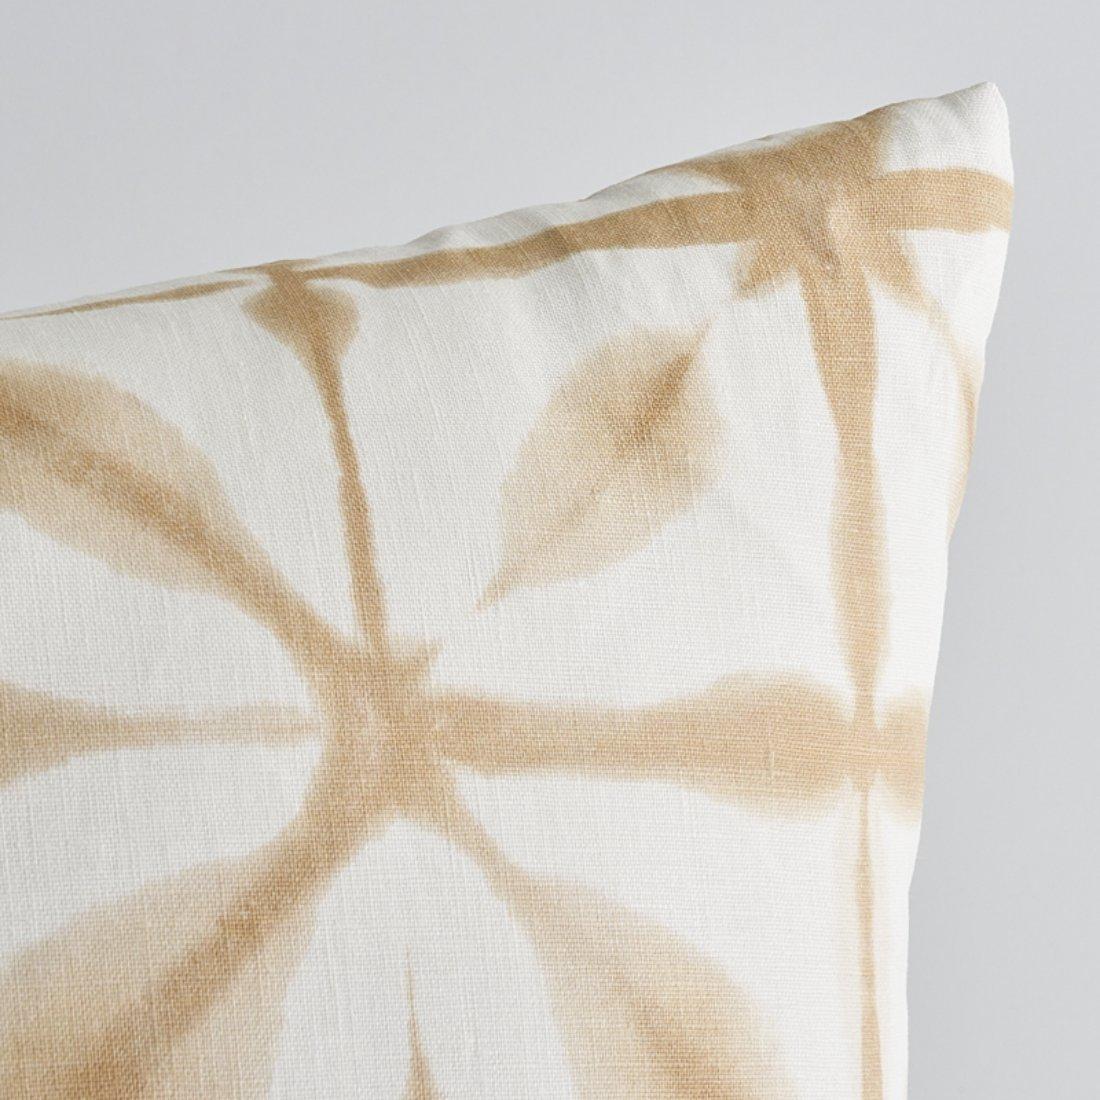 This pillow features Andromeda with a Knife Edge finish. This printed linen evokes the traditional Japanese dye technique of shibori. With its soft, blurred edges, Andromeda adds interest without being overpowering. Pillow includes a feather/down